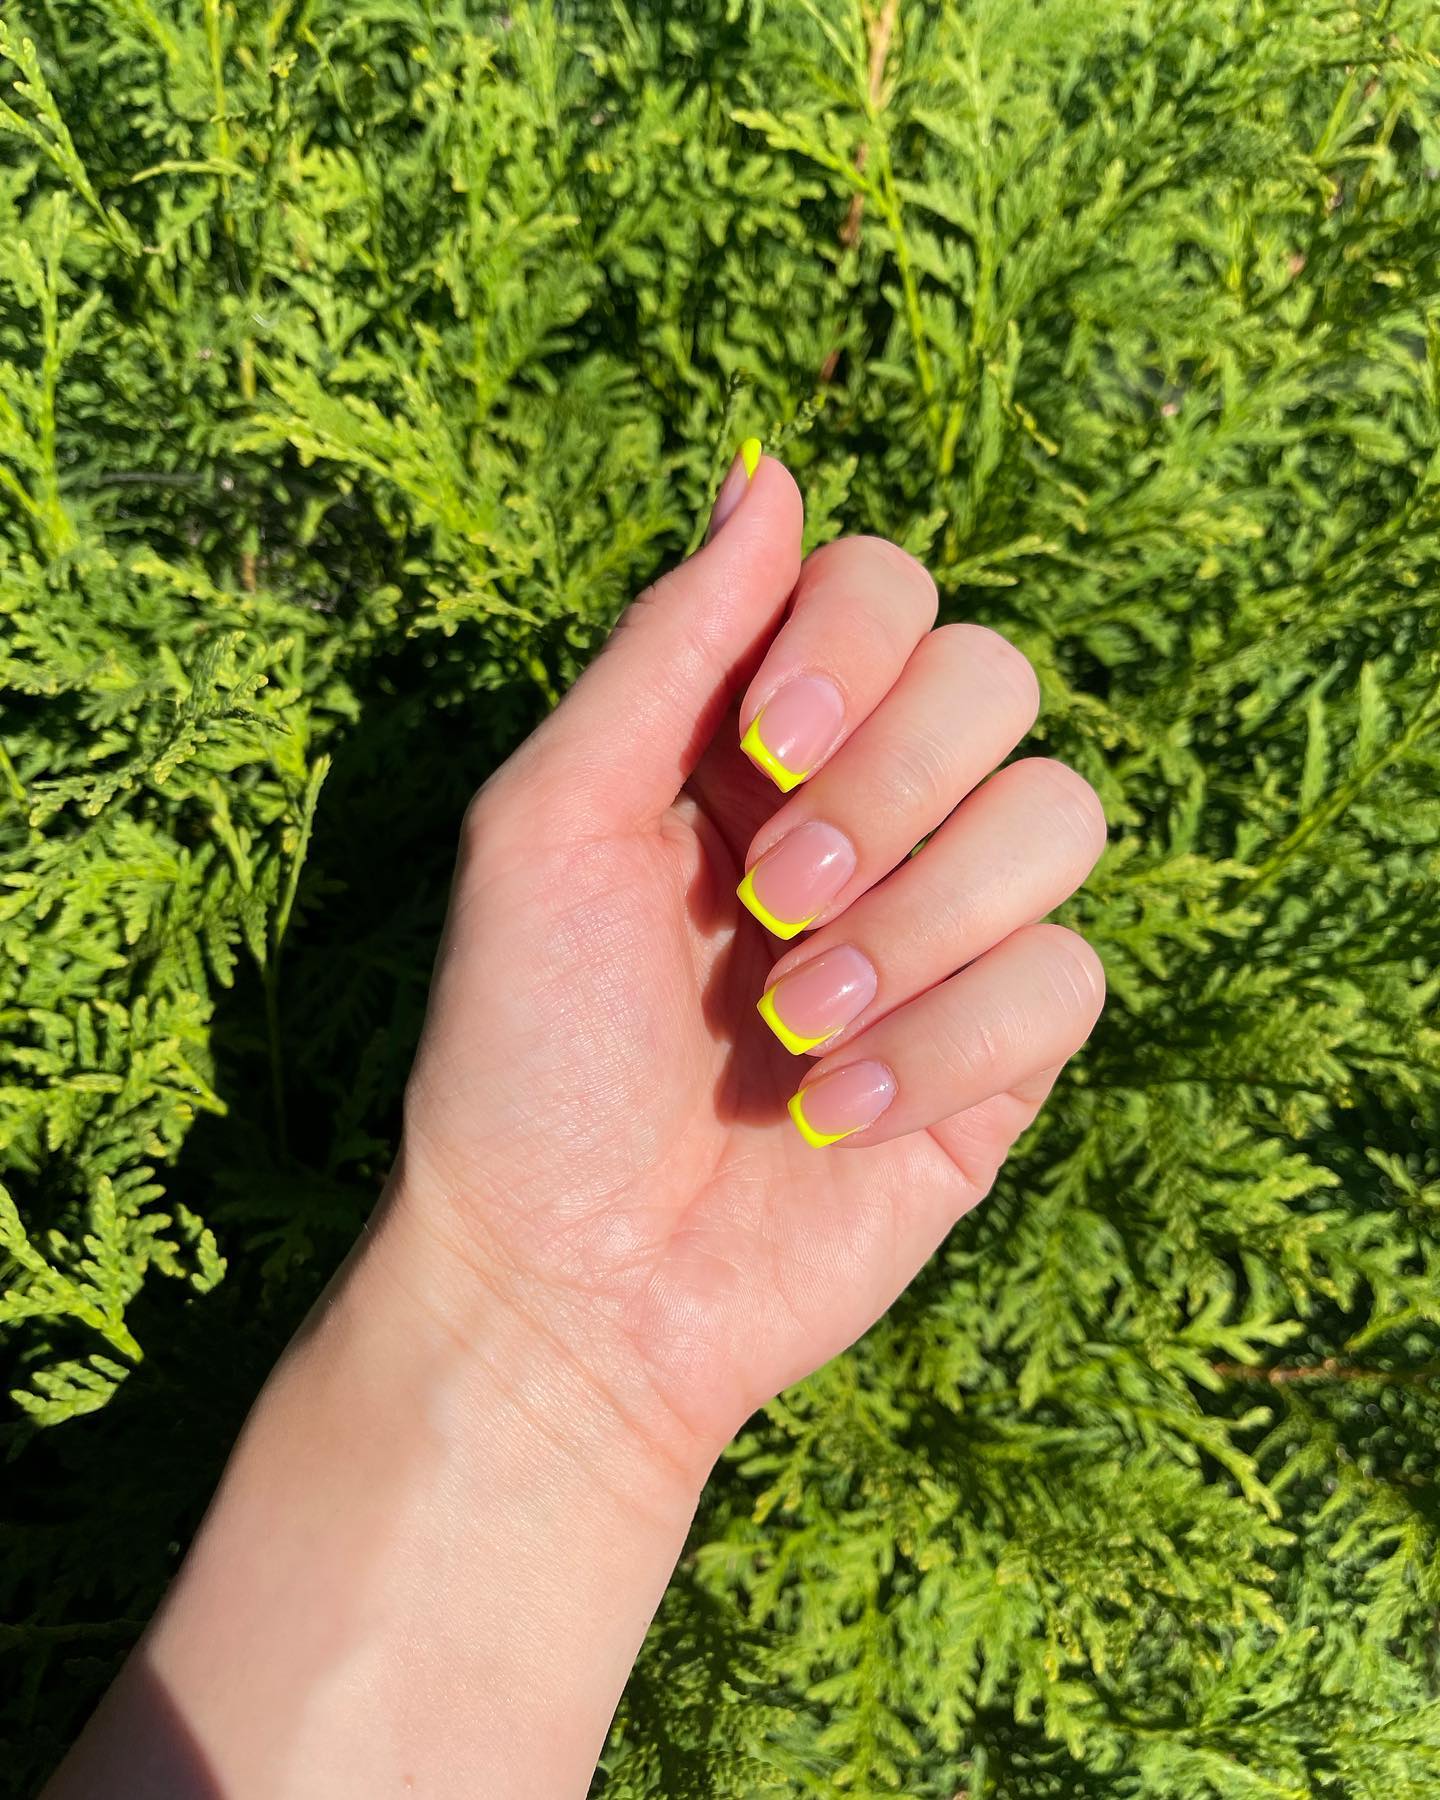 Square shape nails and yellow French tip will look fun and is perfect for the office, ideal for those who like to go out of their comfort zone from time to time.